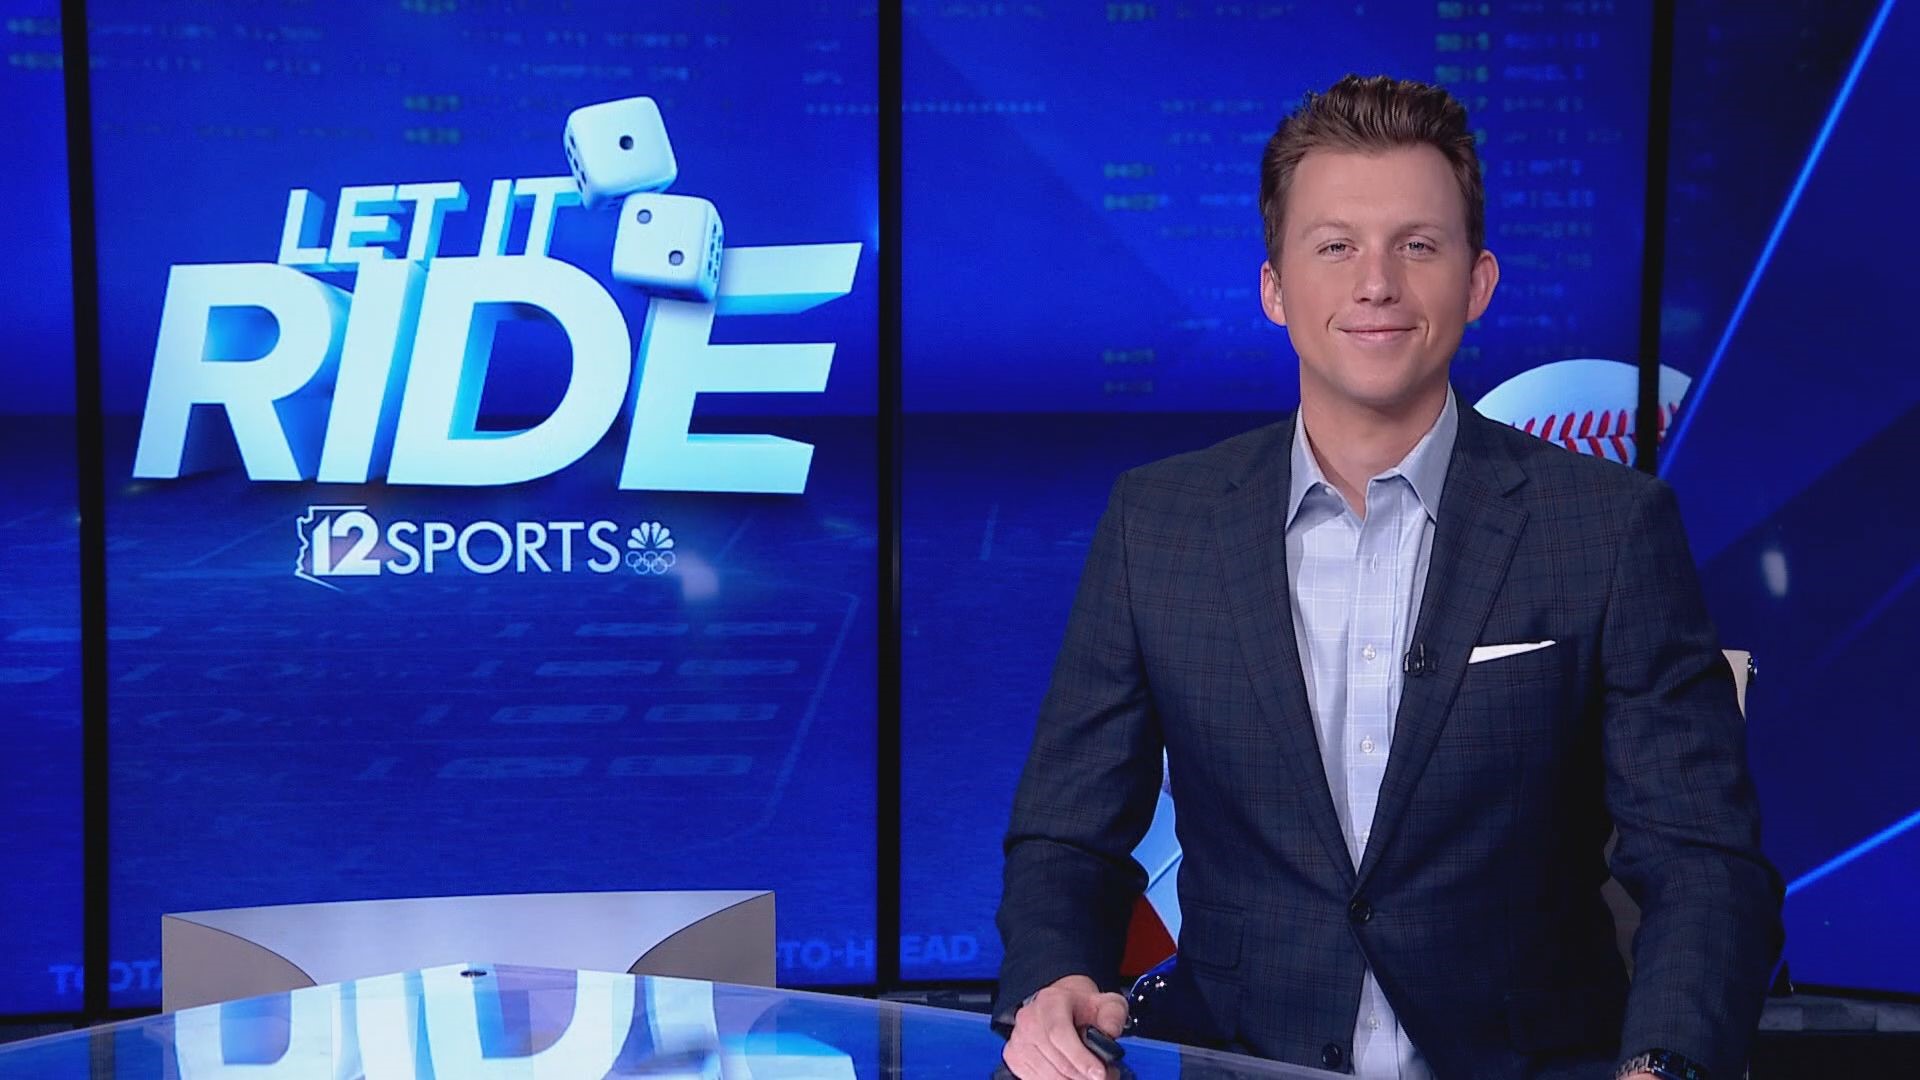 On this edition of Let It Ride, host Luke Lyddon previews the upcoming Masters golf tournament in Augusta.